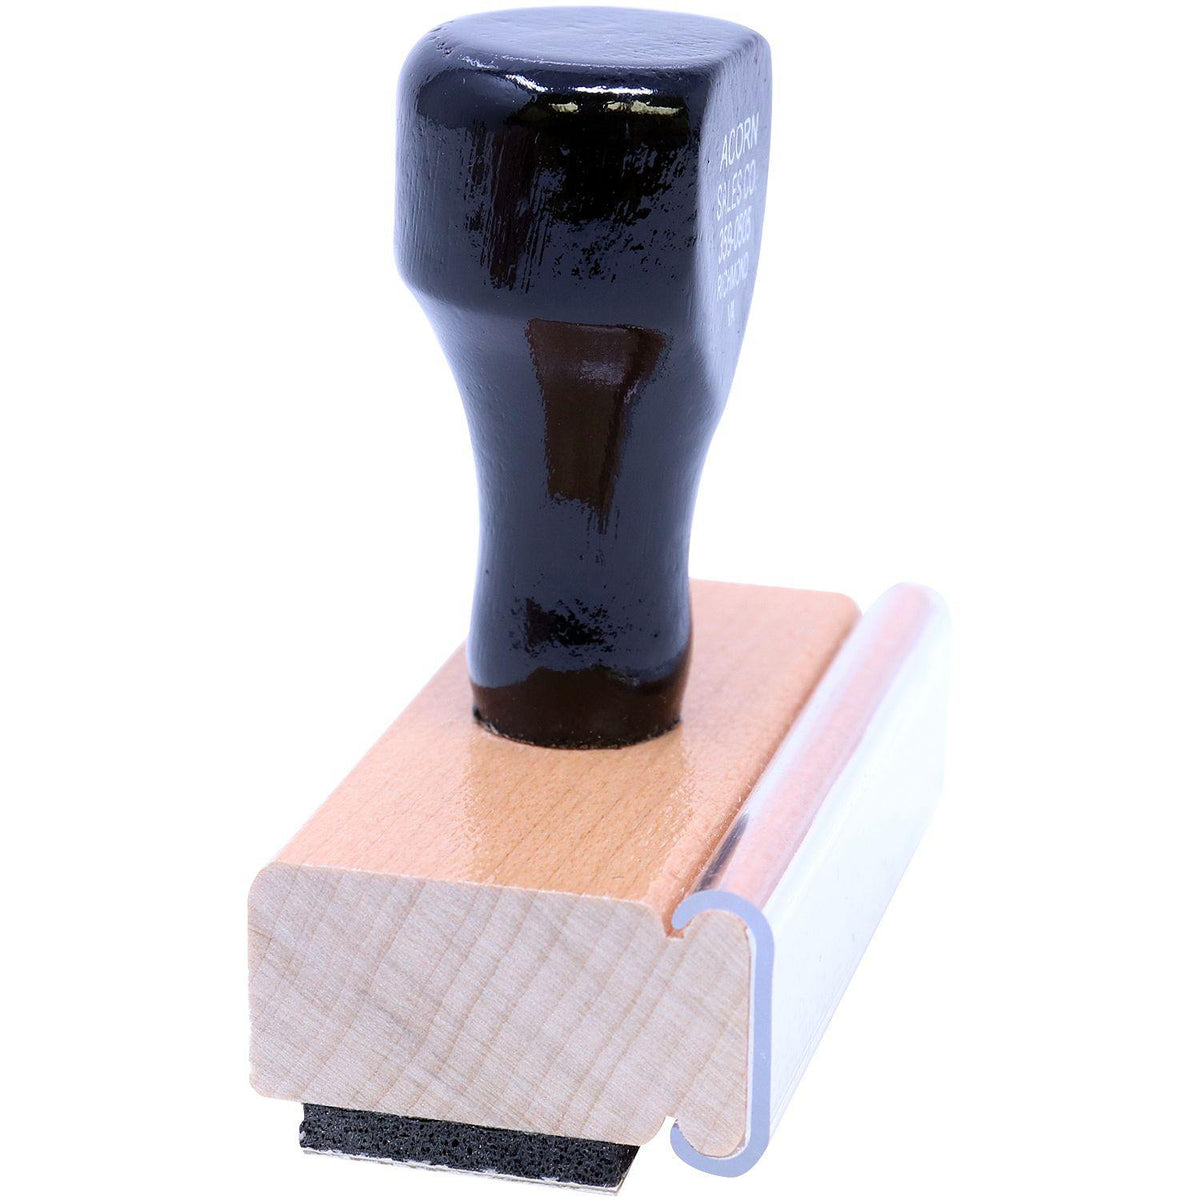 Side View of Large Avis De Receiption Rubber Stamp at an Angle